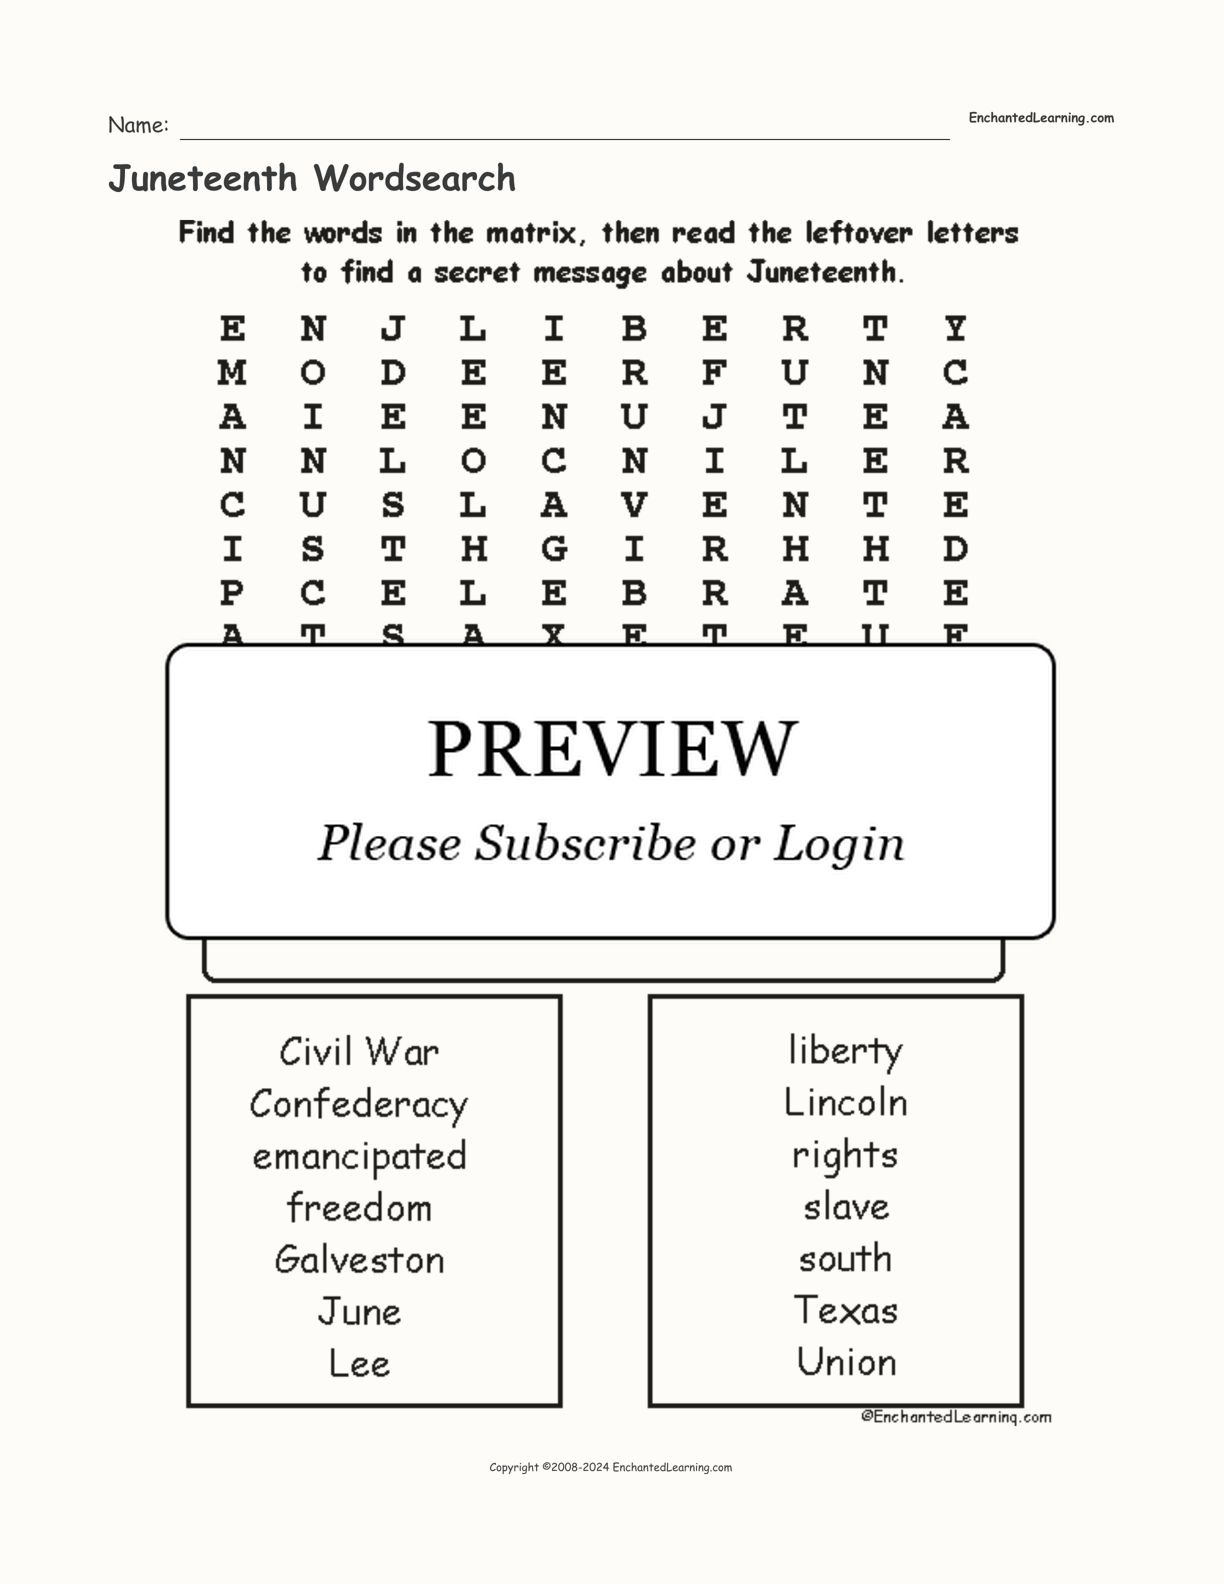 Juneteenth Wordsearch interactive worksheet page 1